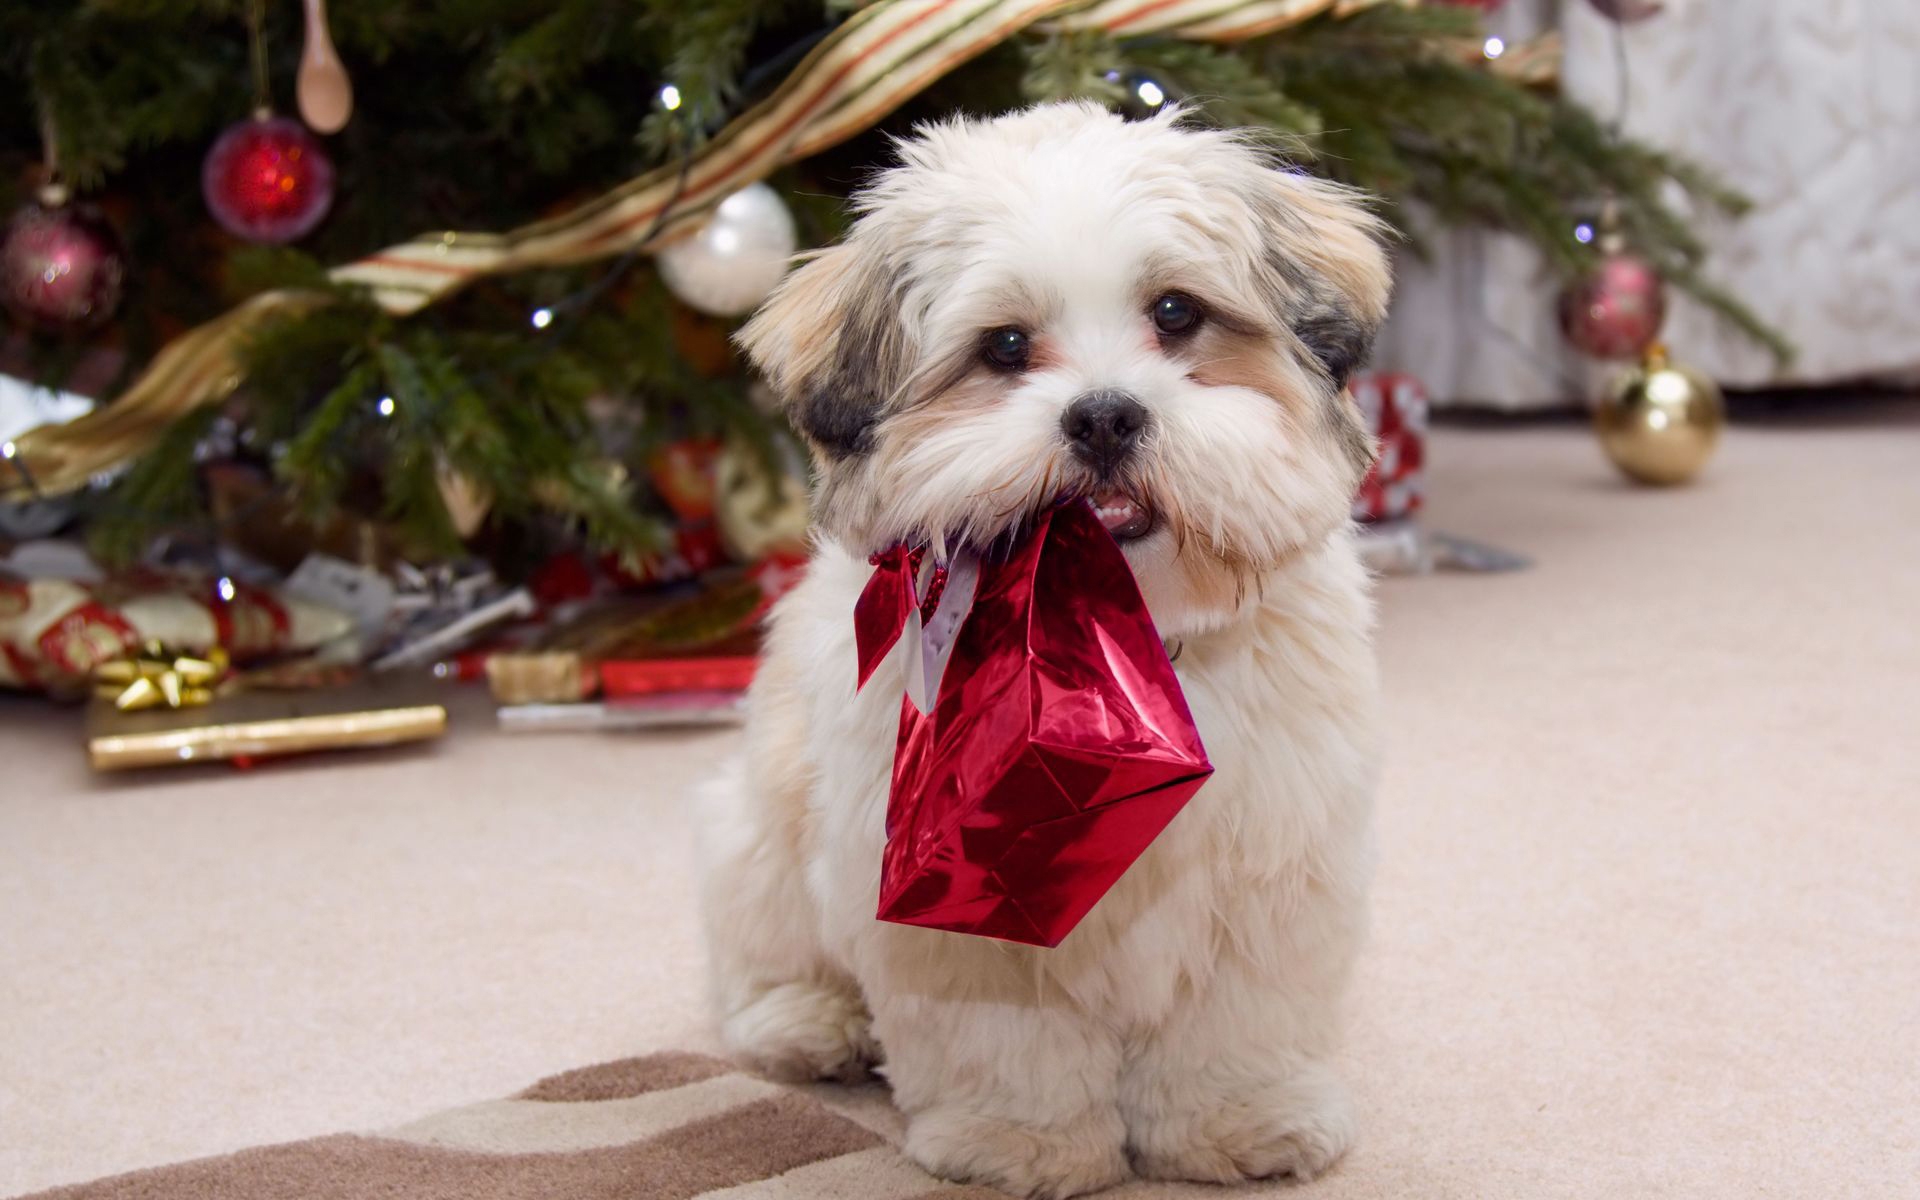 Shih tzu puppy for Christmas wallpapers and images - wallpapers ...